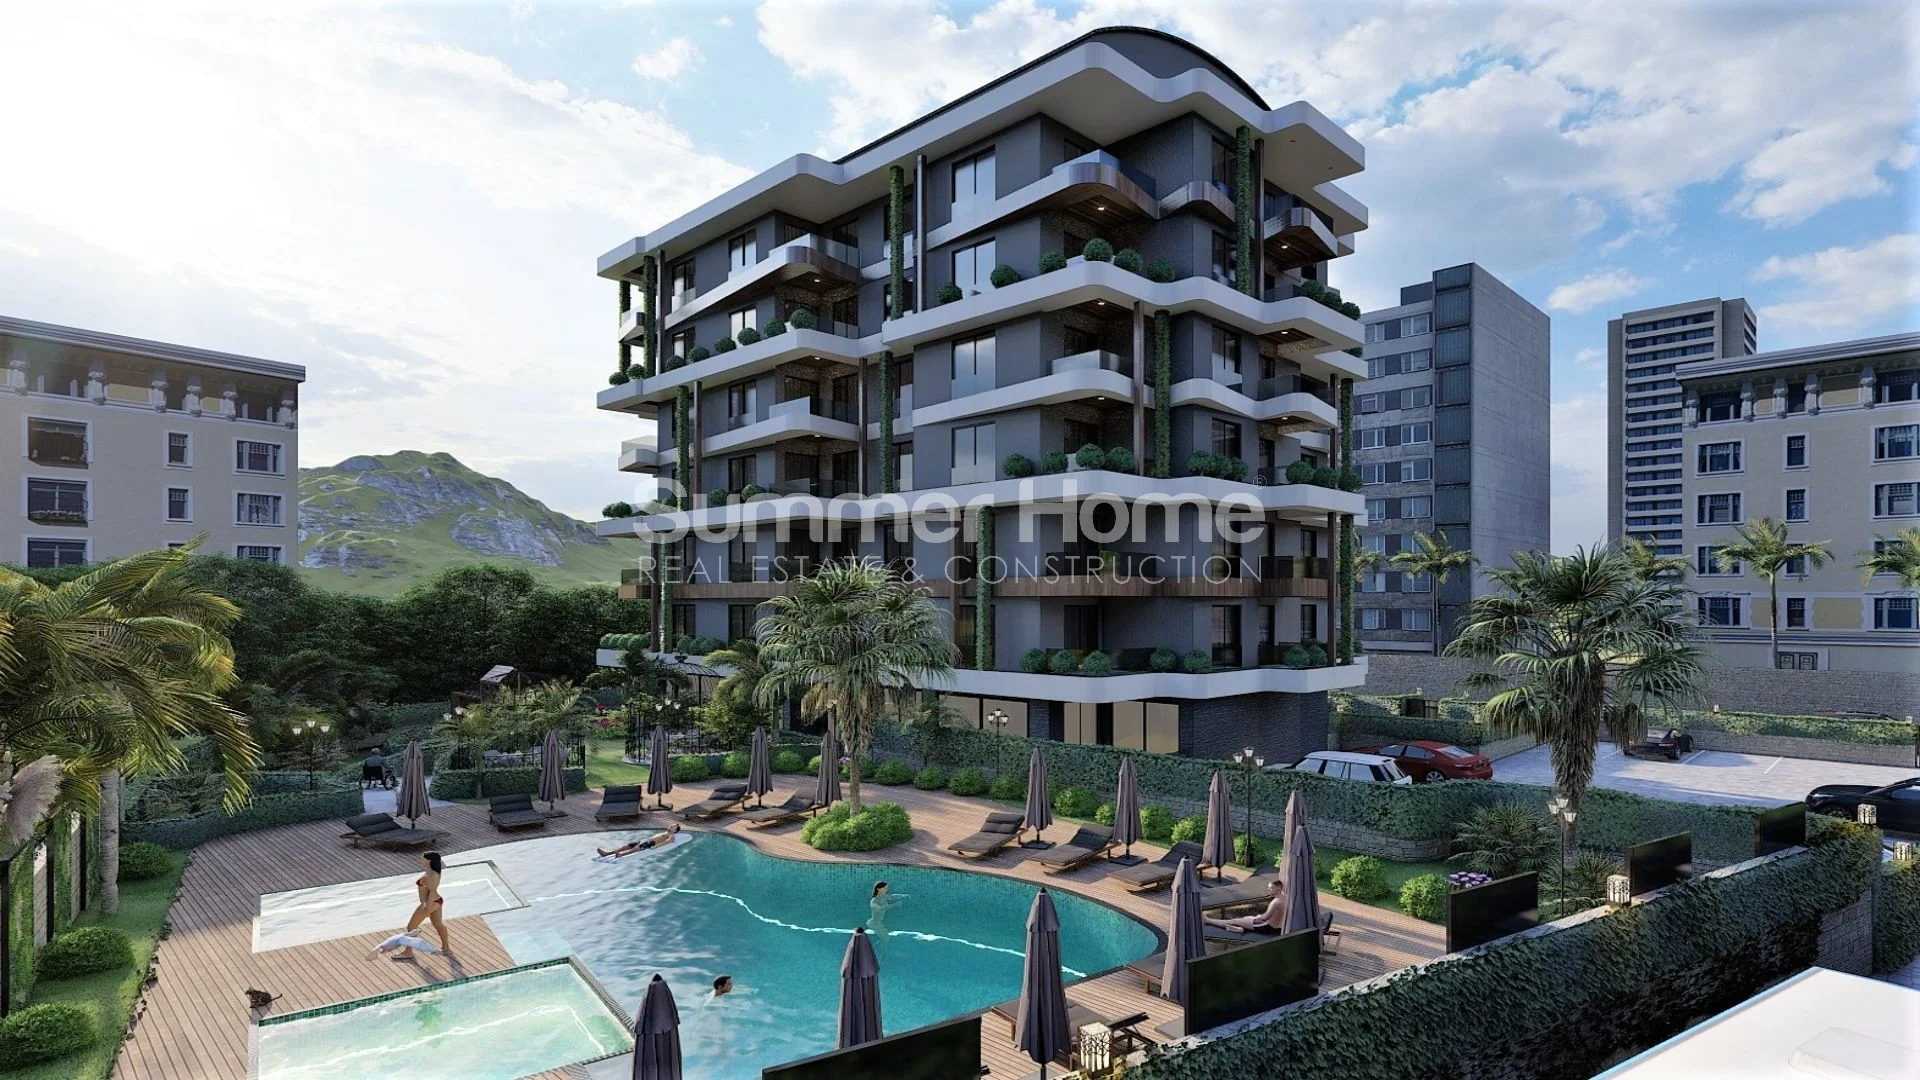 Gorgeous, Chic Apartments for Sale in Avsallar General - 5